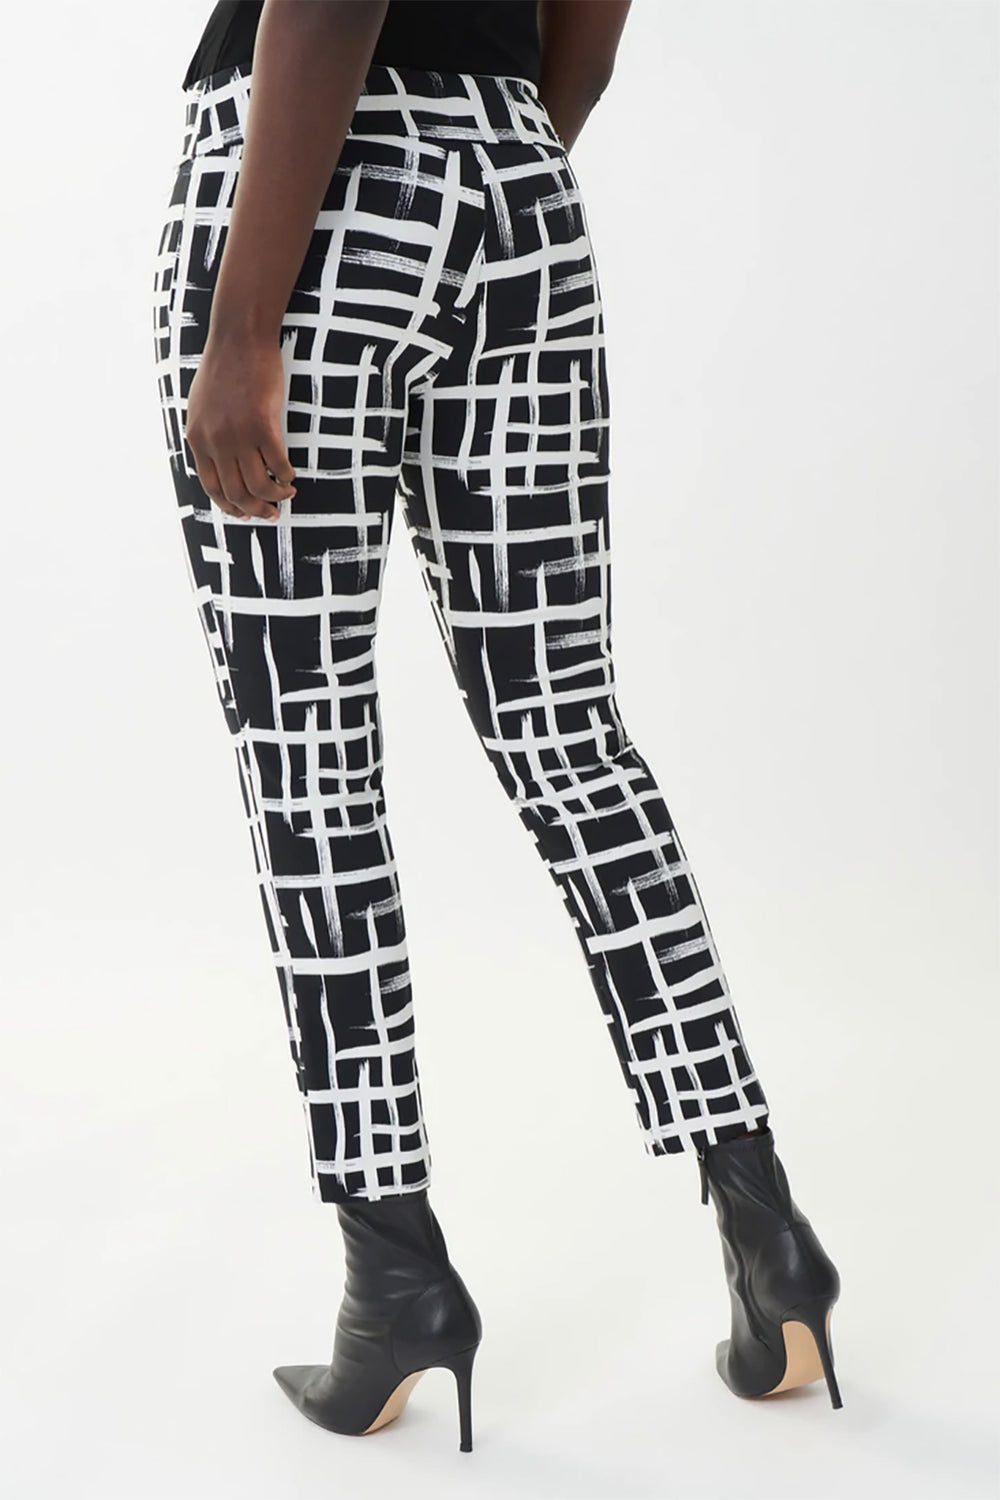 Woman wearing the block inspired pant in black & white by Joseph Ribkoff, sold and shipped from Pizazz Boutique Nelson Bay women's dresses online Australia